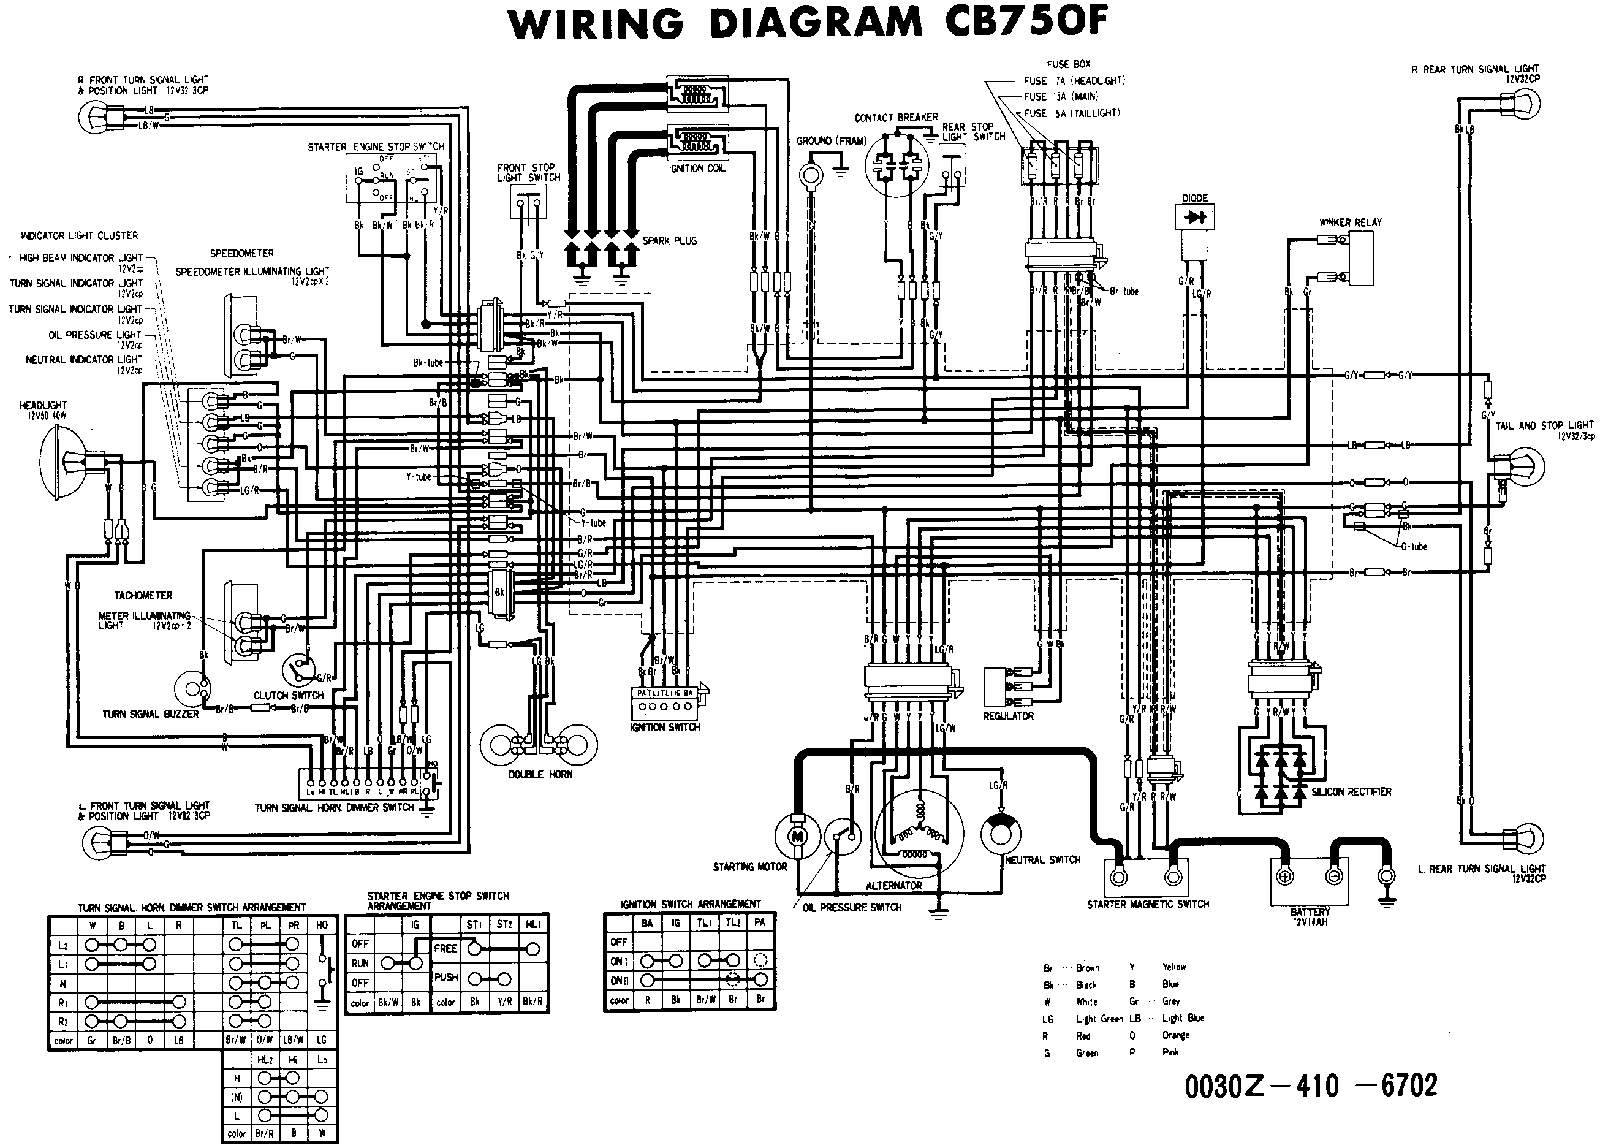 Picture 5 of 6 from Honda CB750 Wiring Diagrams